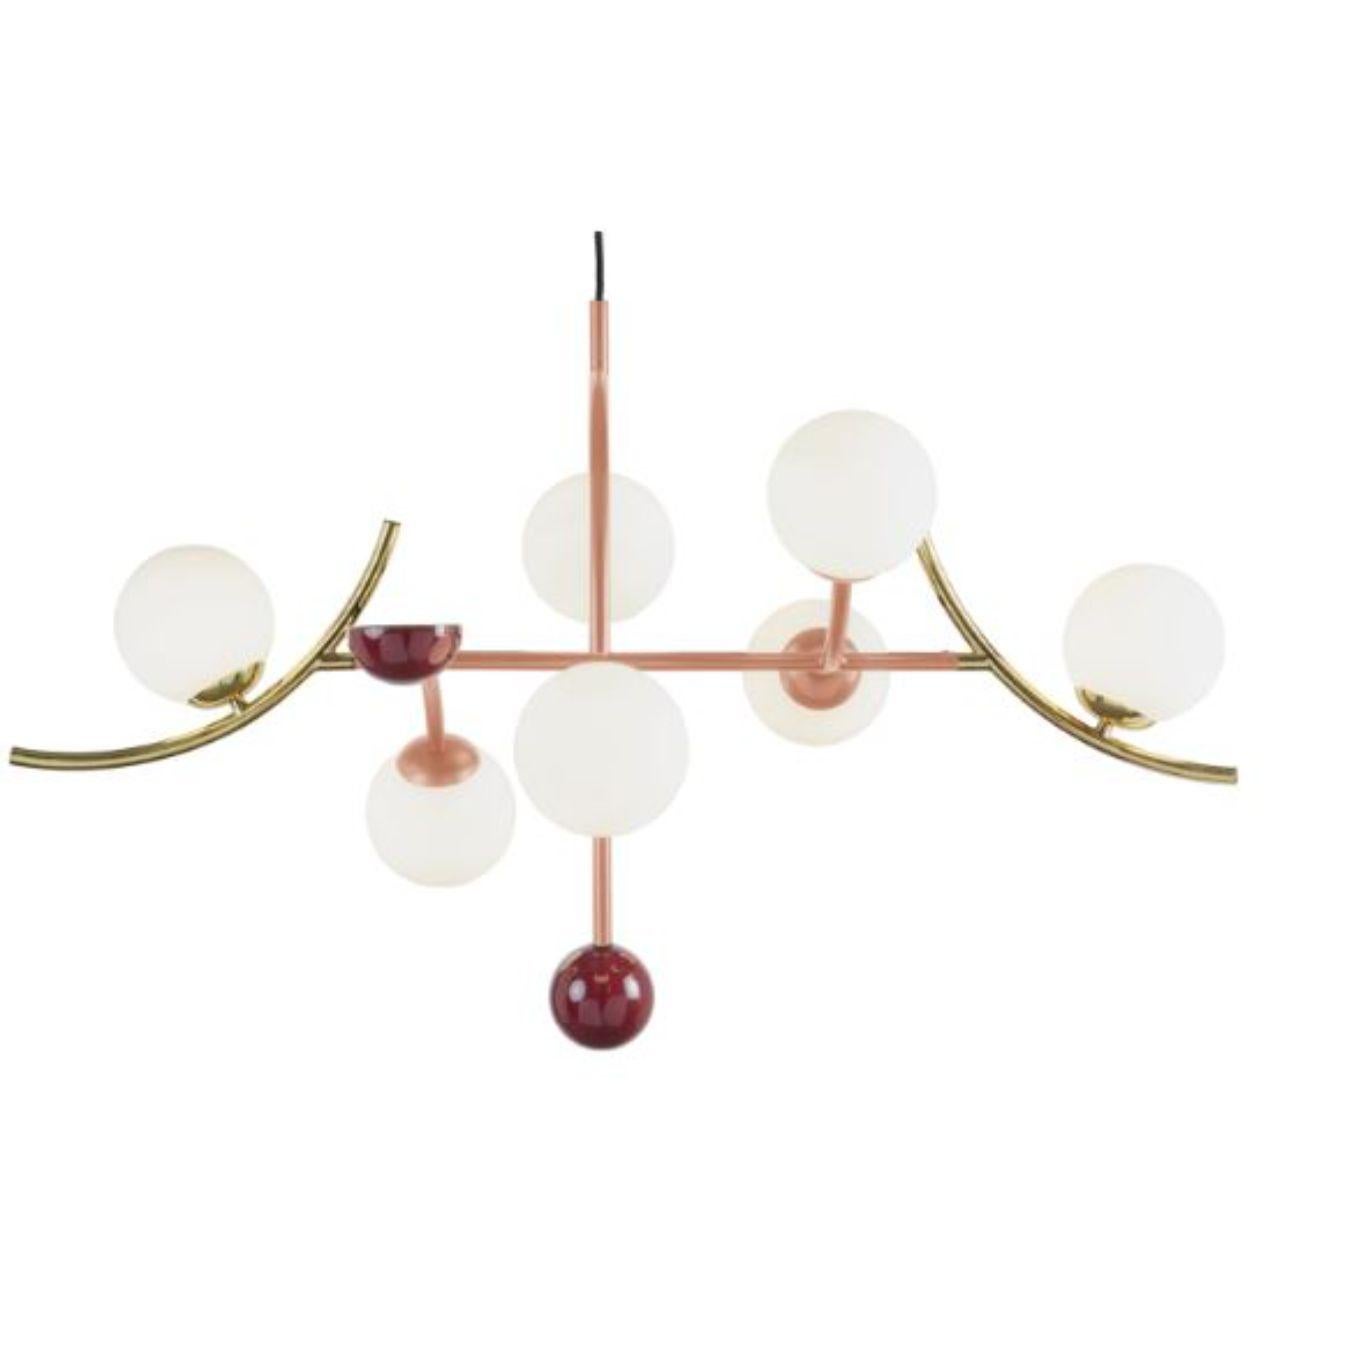 Salmon Helio Suspension lamp by Dooq
Dimensions: W 130 x D 70 x H 80 cm
Materials: lacquered metal, brass/nickel.
Also available in different colors. 

Information:
230V/50Hz
7 x max. G9
4W LED

120V/60Hz
7 x max. G9
4W LED

Cable: